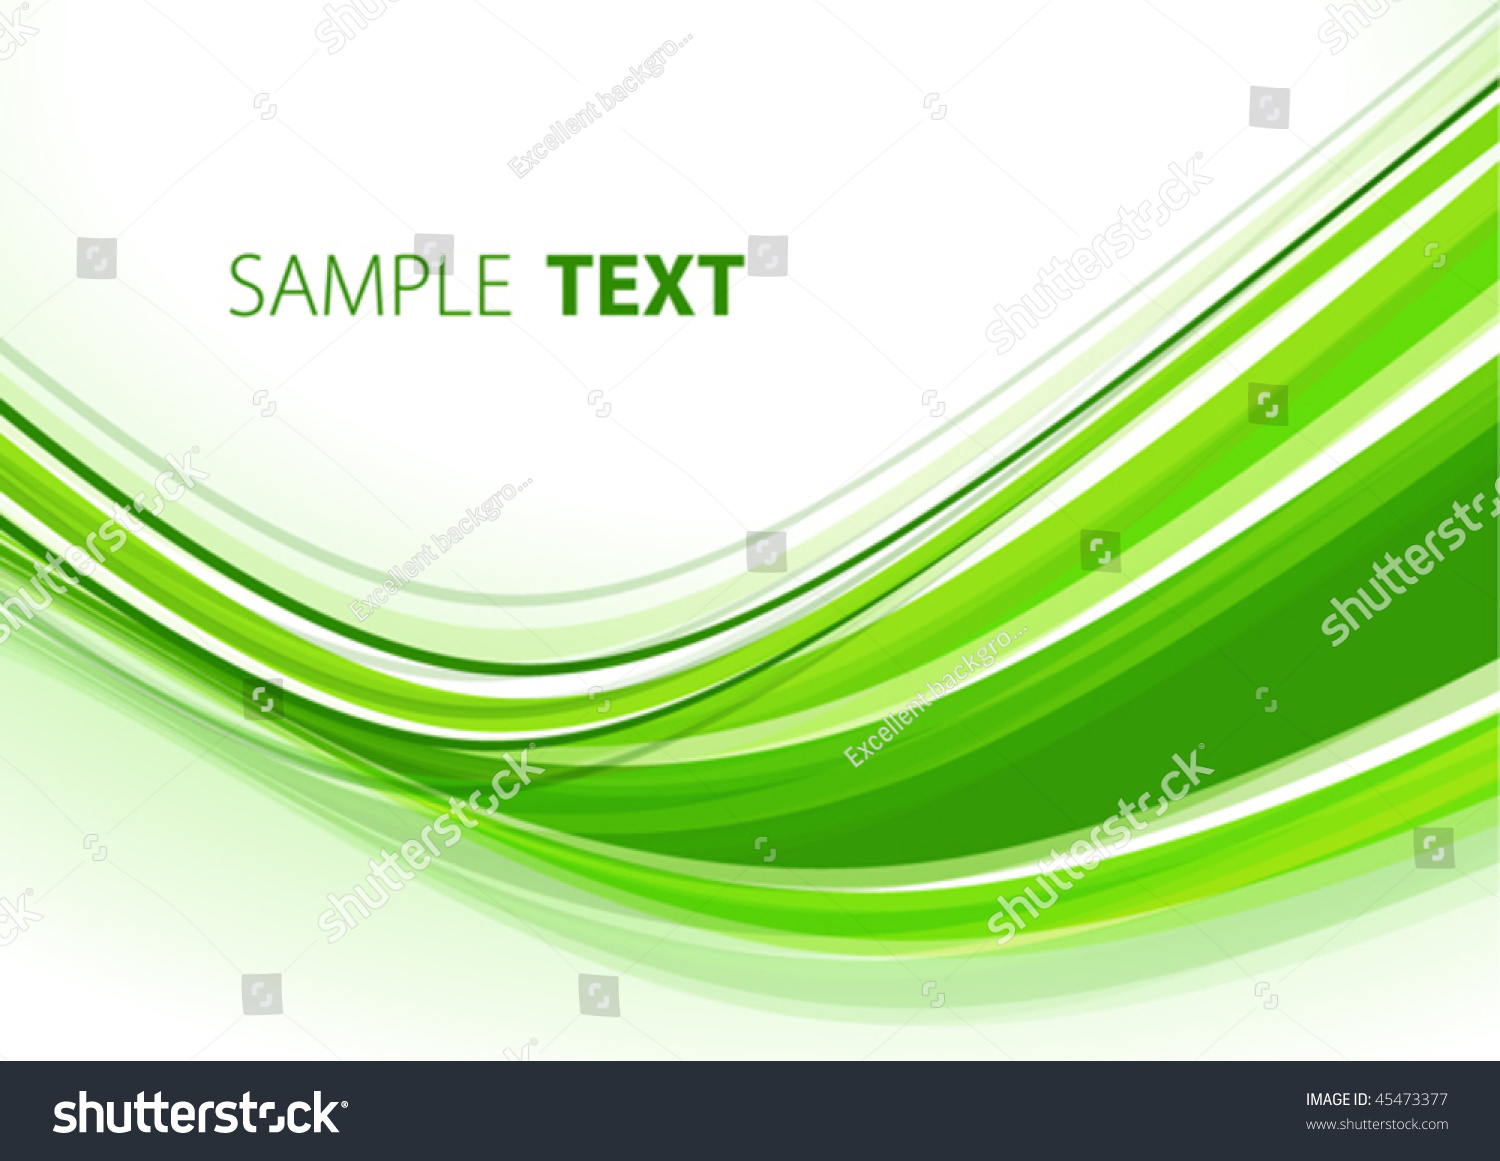 Green Abstract Background. Vector - 45473377 : Shutterstock